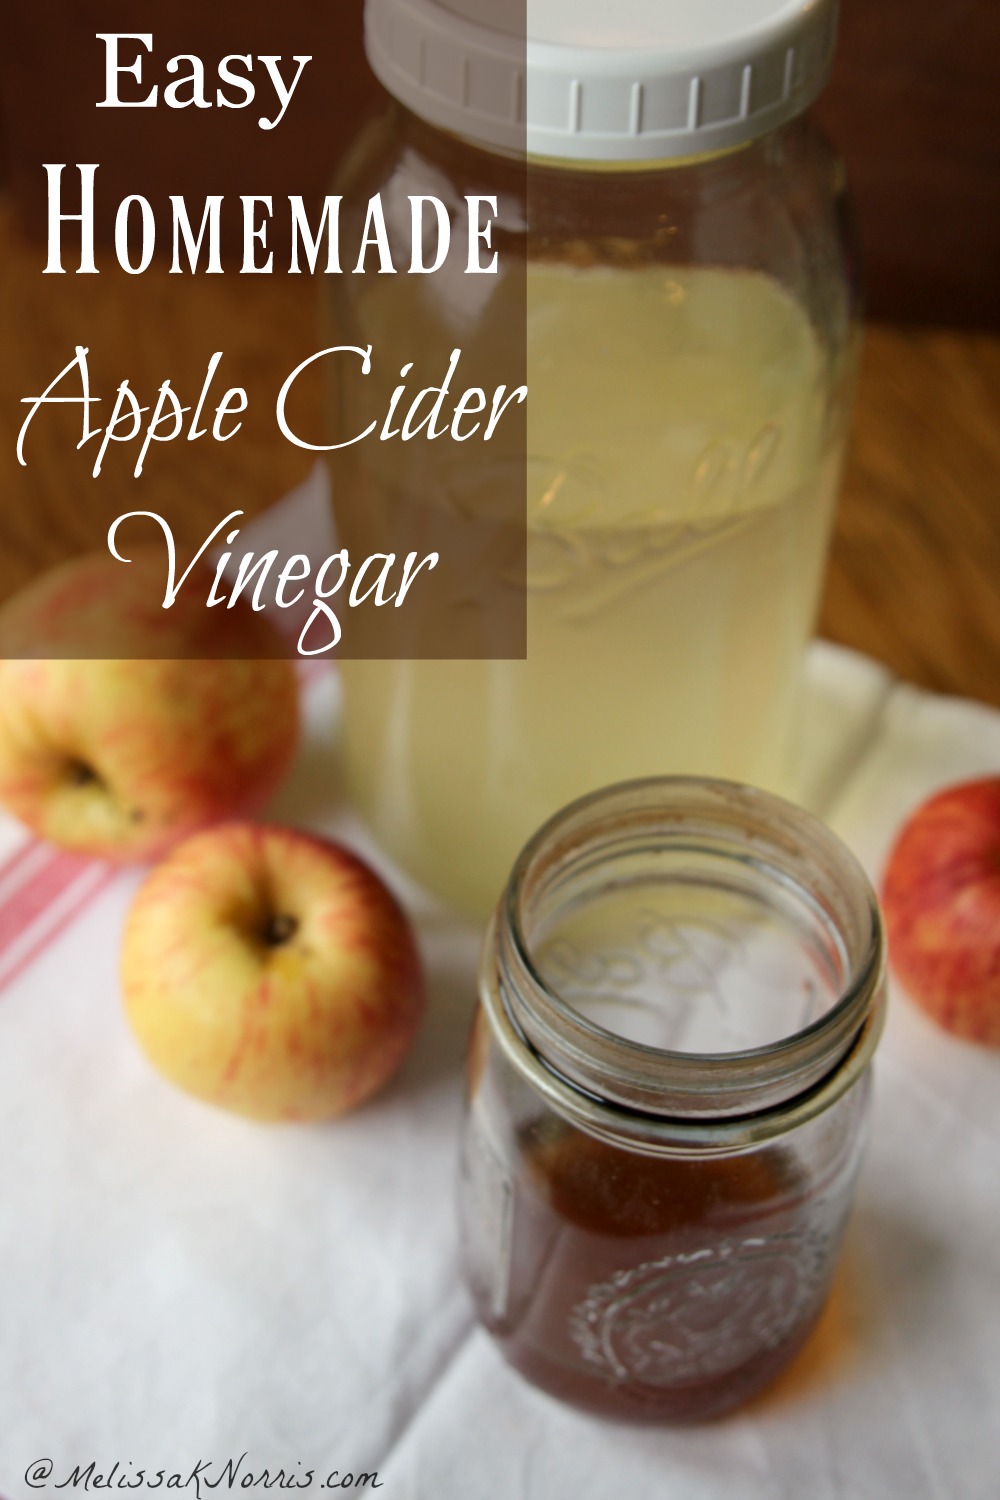 How to Make Raw Apple Cider Vinegar at Home